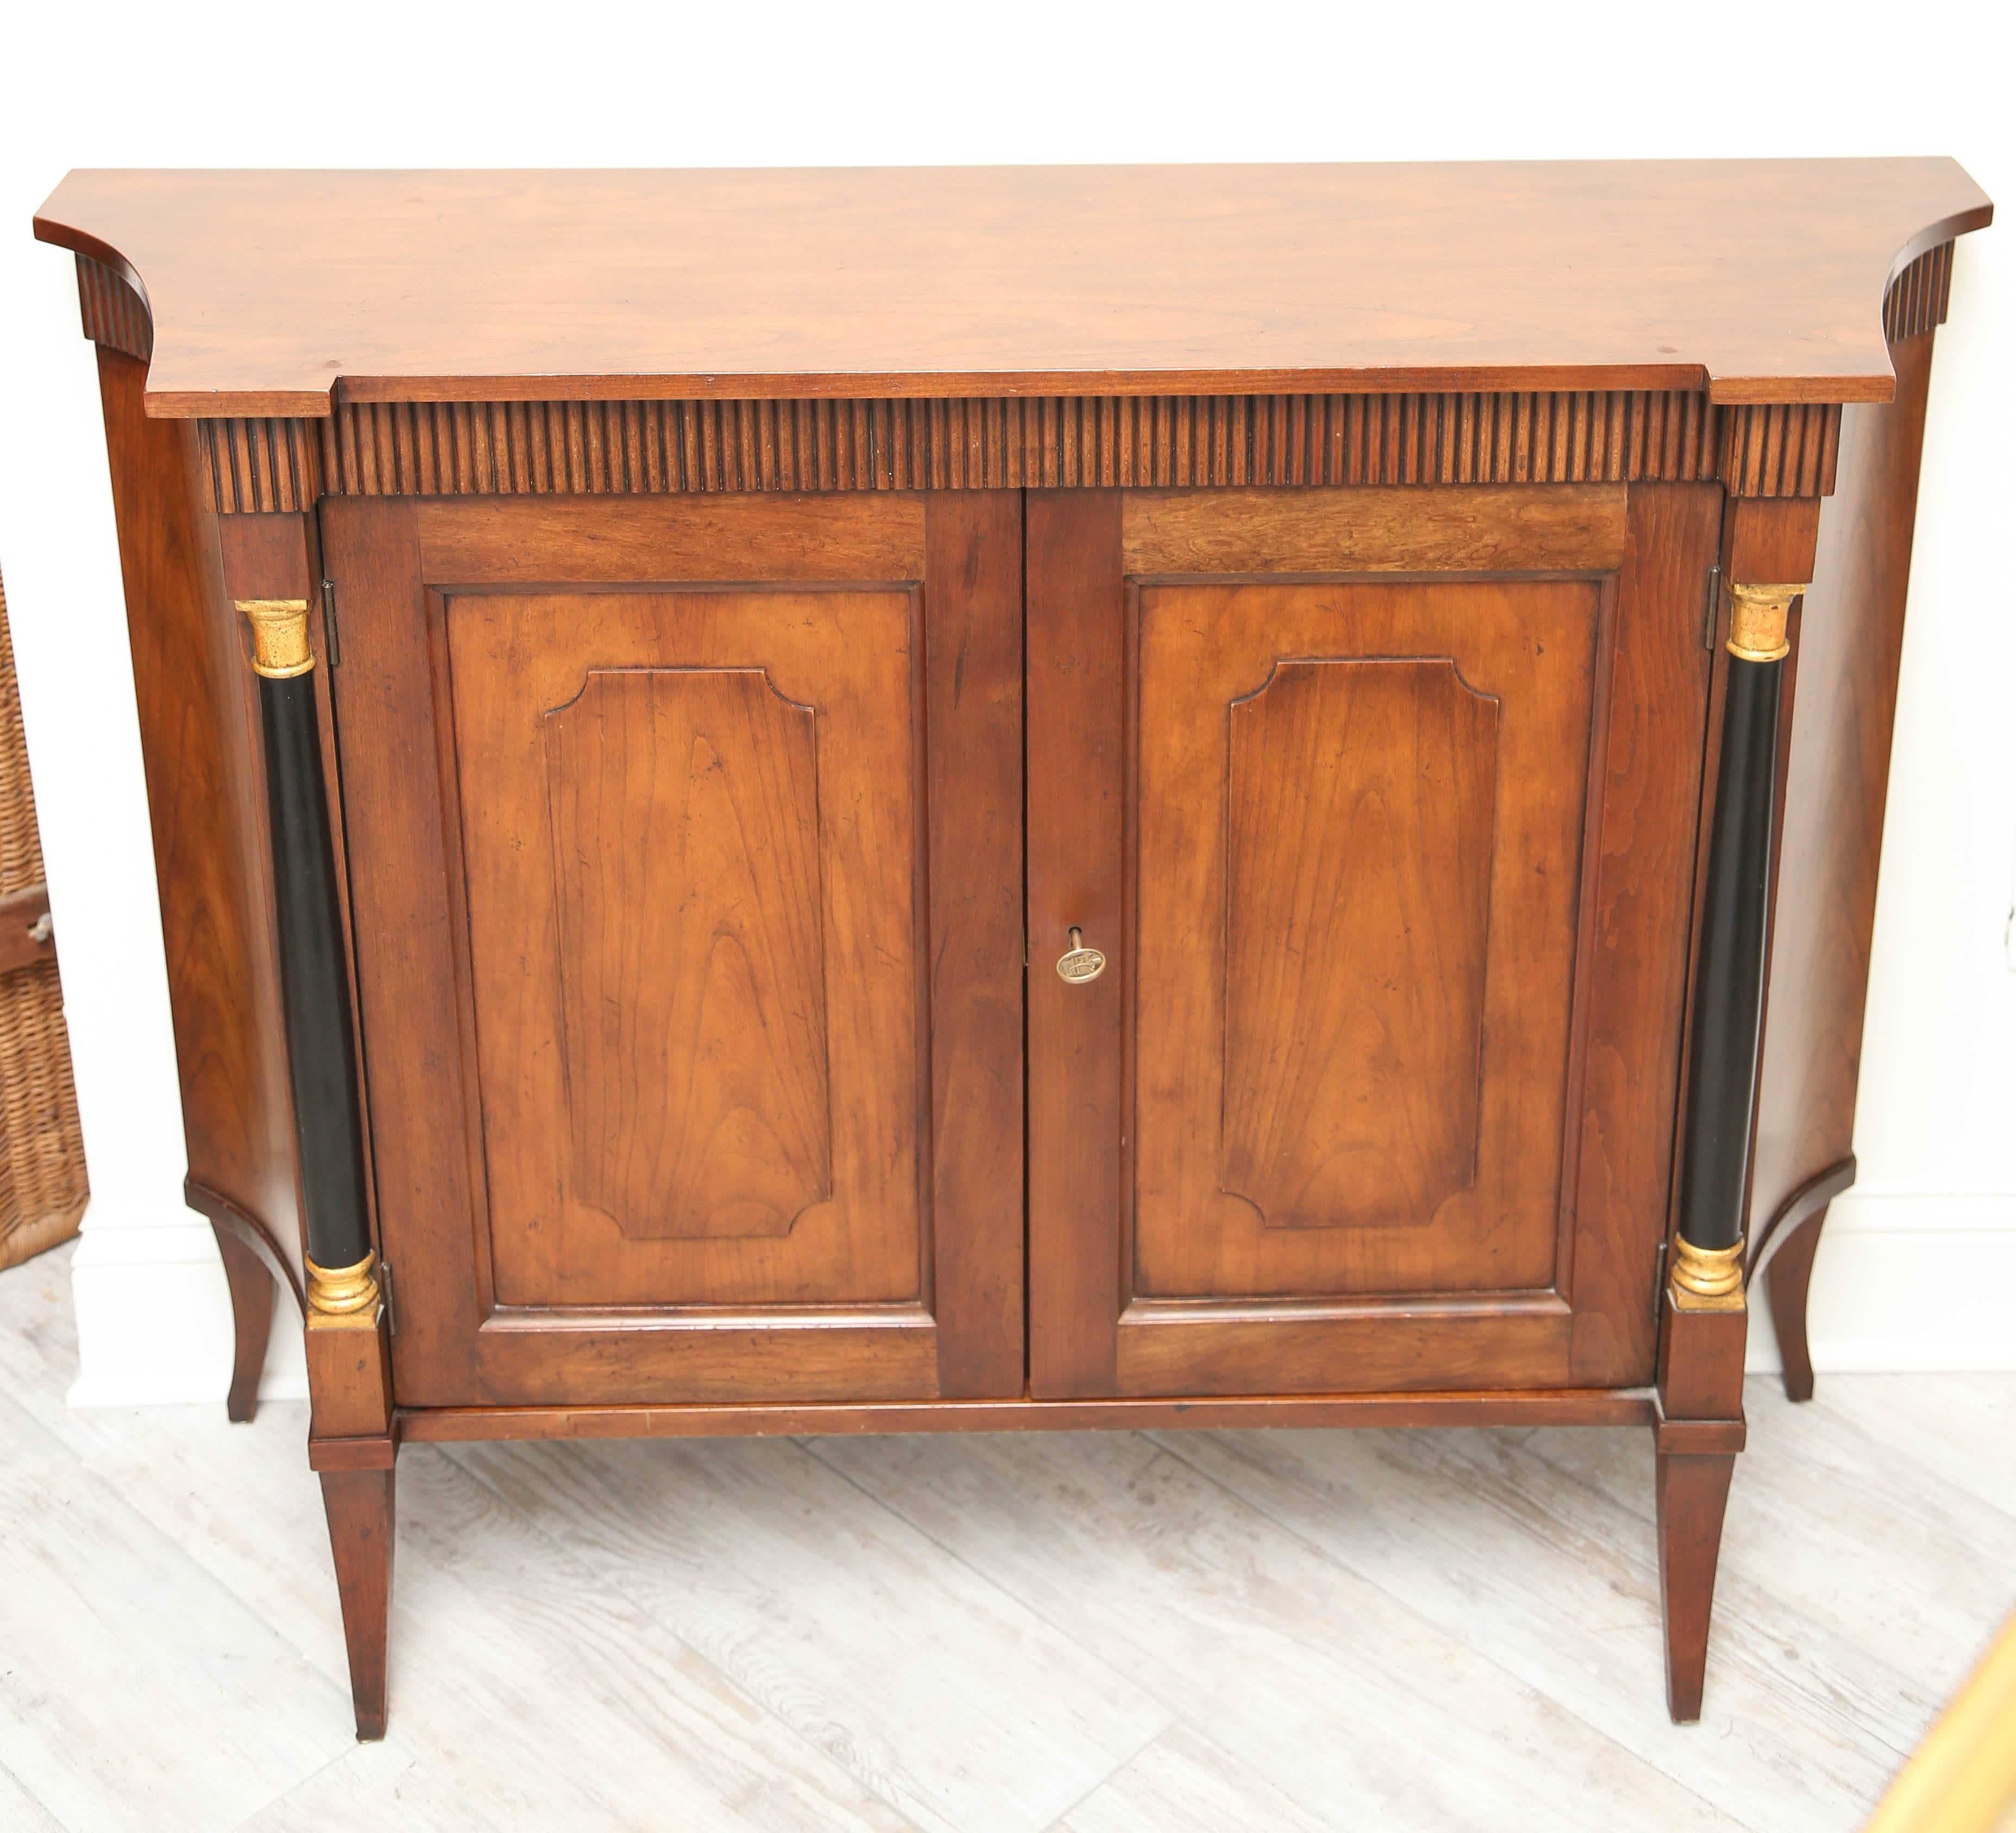 Classical two-door buffet or cabinet with interior shelves in the Biedermeier style by Baker Furniture Co.